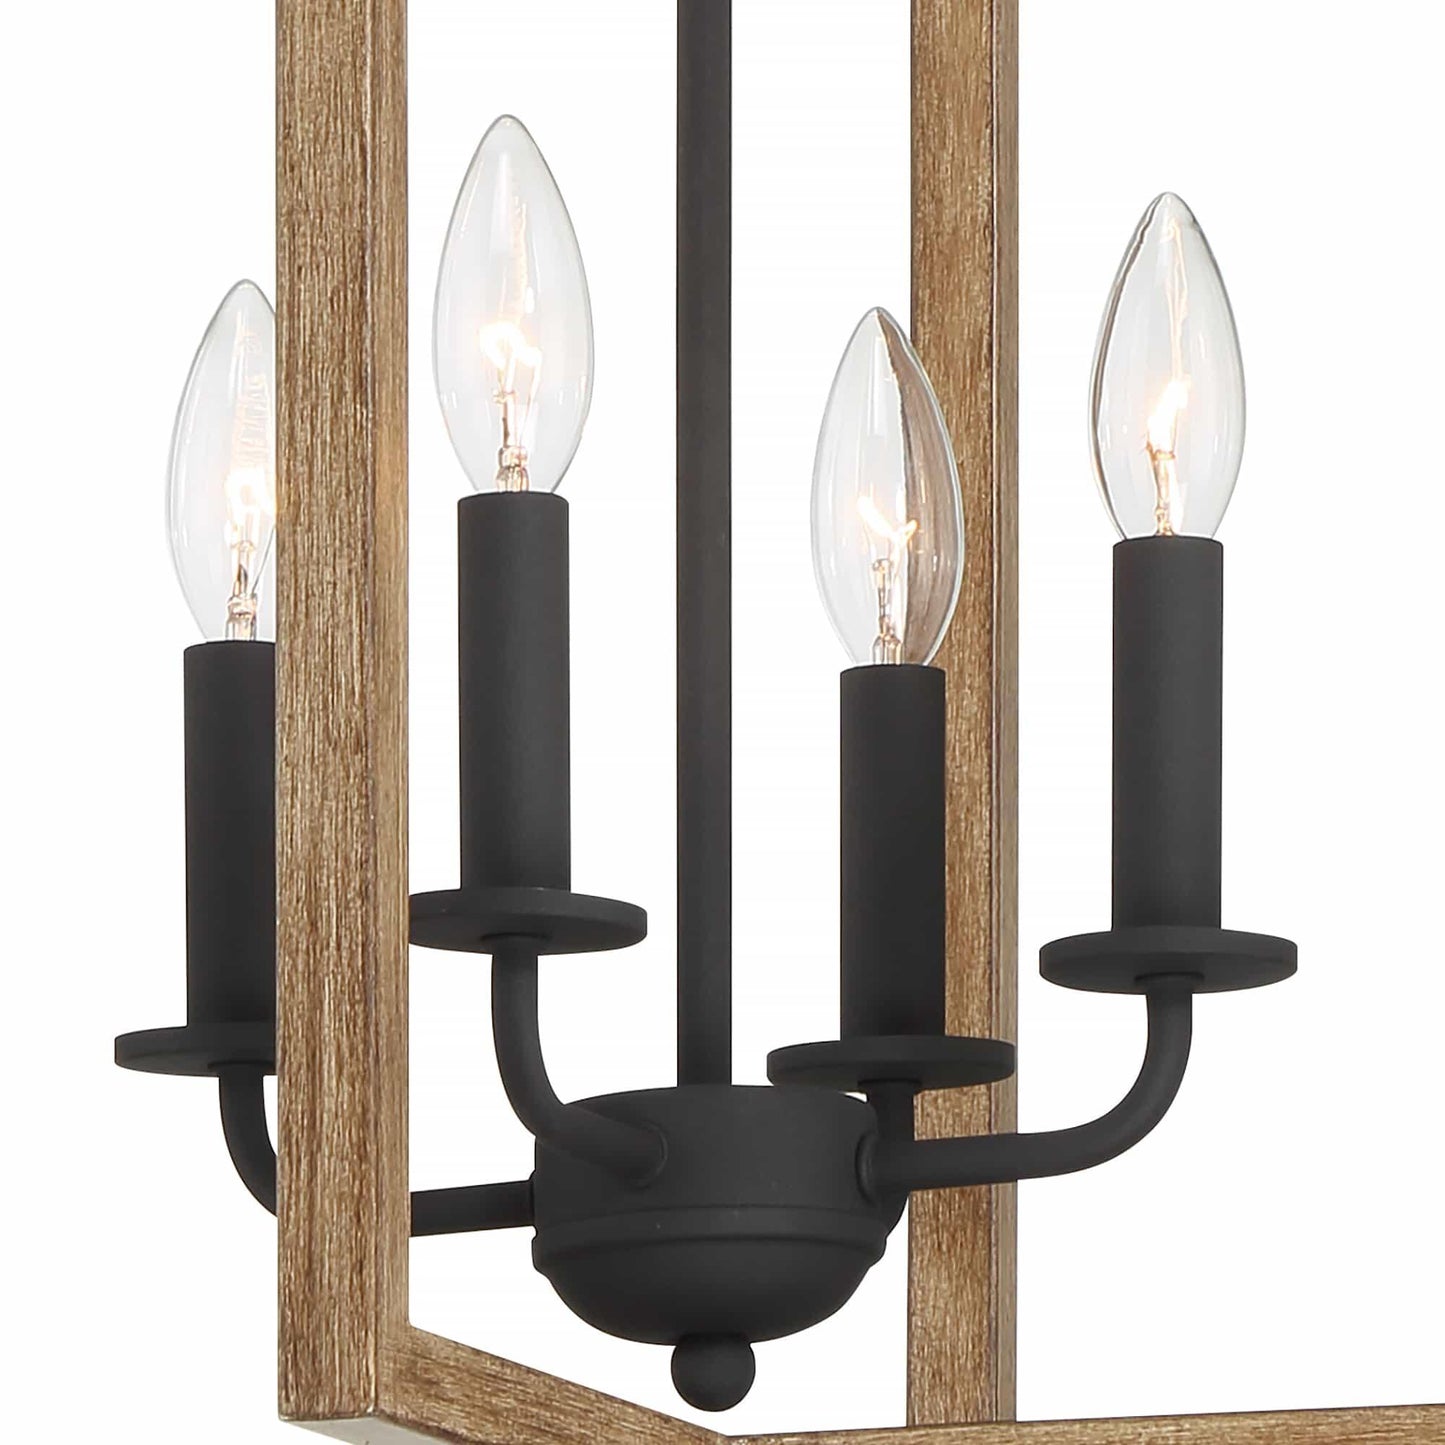 4 light candle style square chandelier (15) by ACROMA